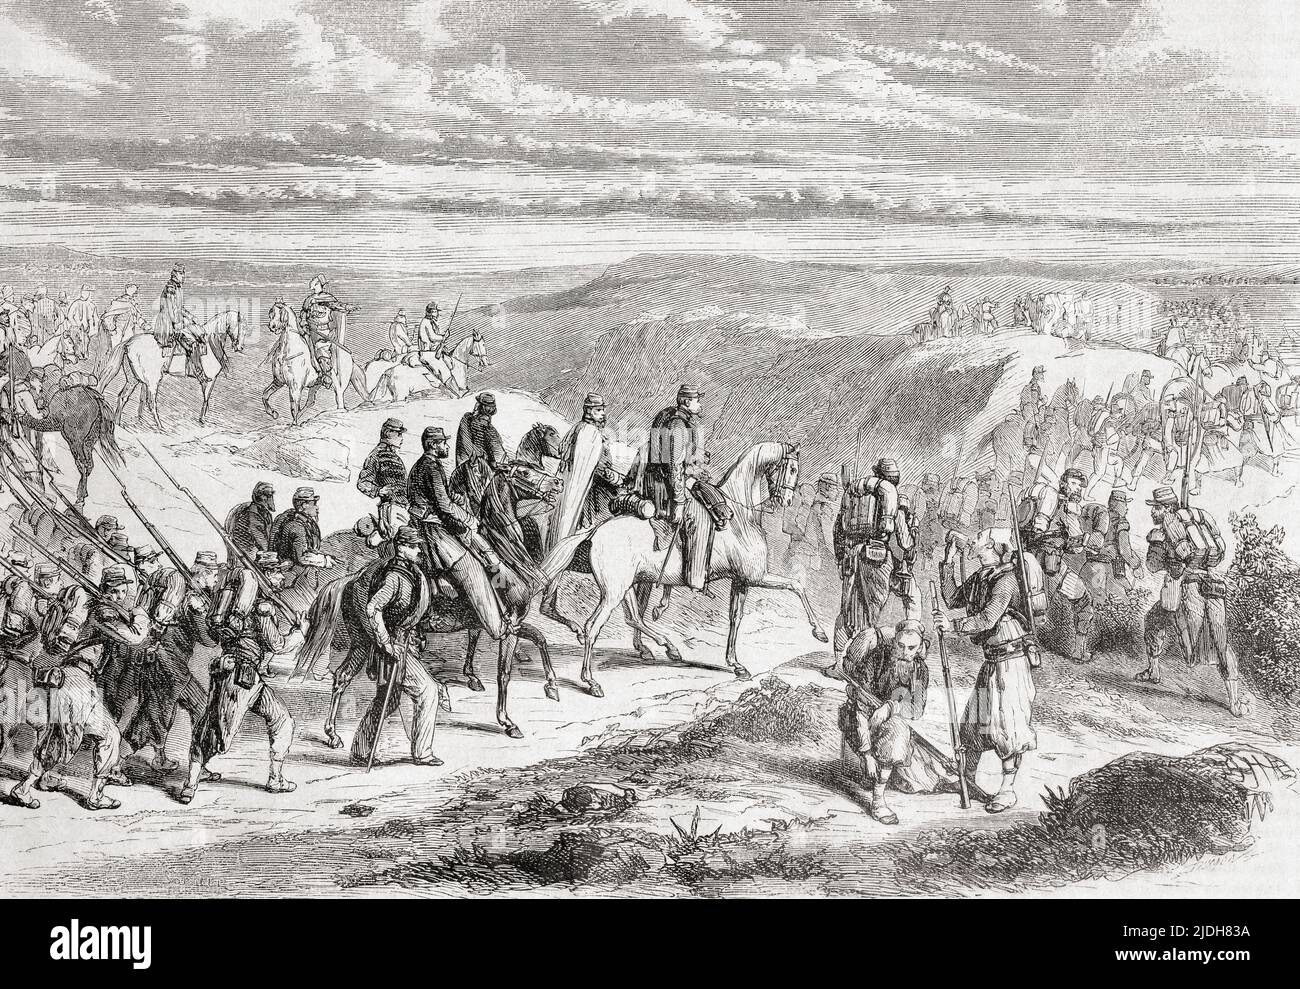 March of the expeditionary column from western Algeria under the command of General Edmond-Charles de Martimprey, 1859.  From L'Univers Illustre, published Paris, 1859 Stock Photo